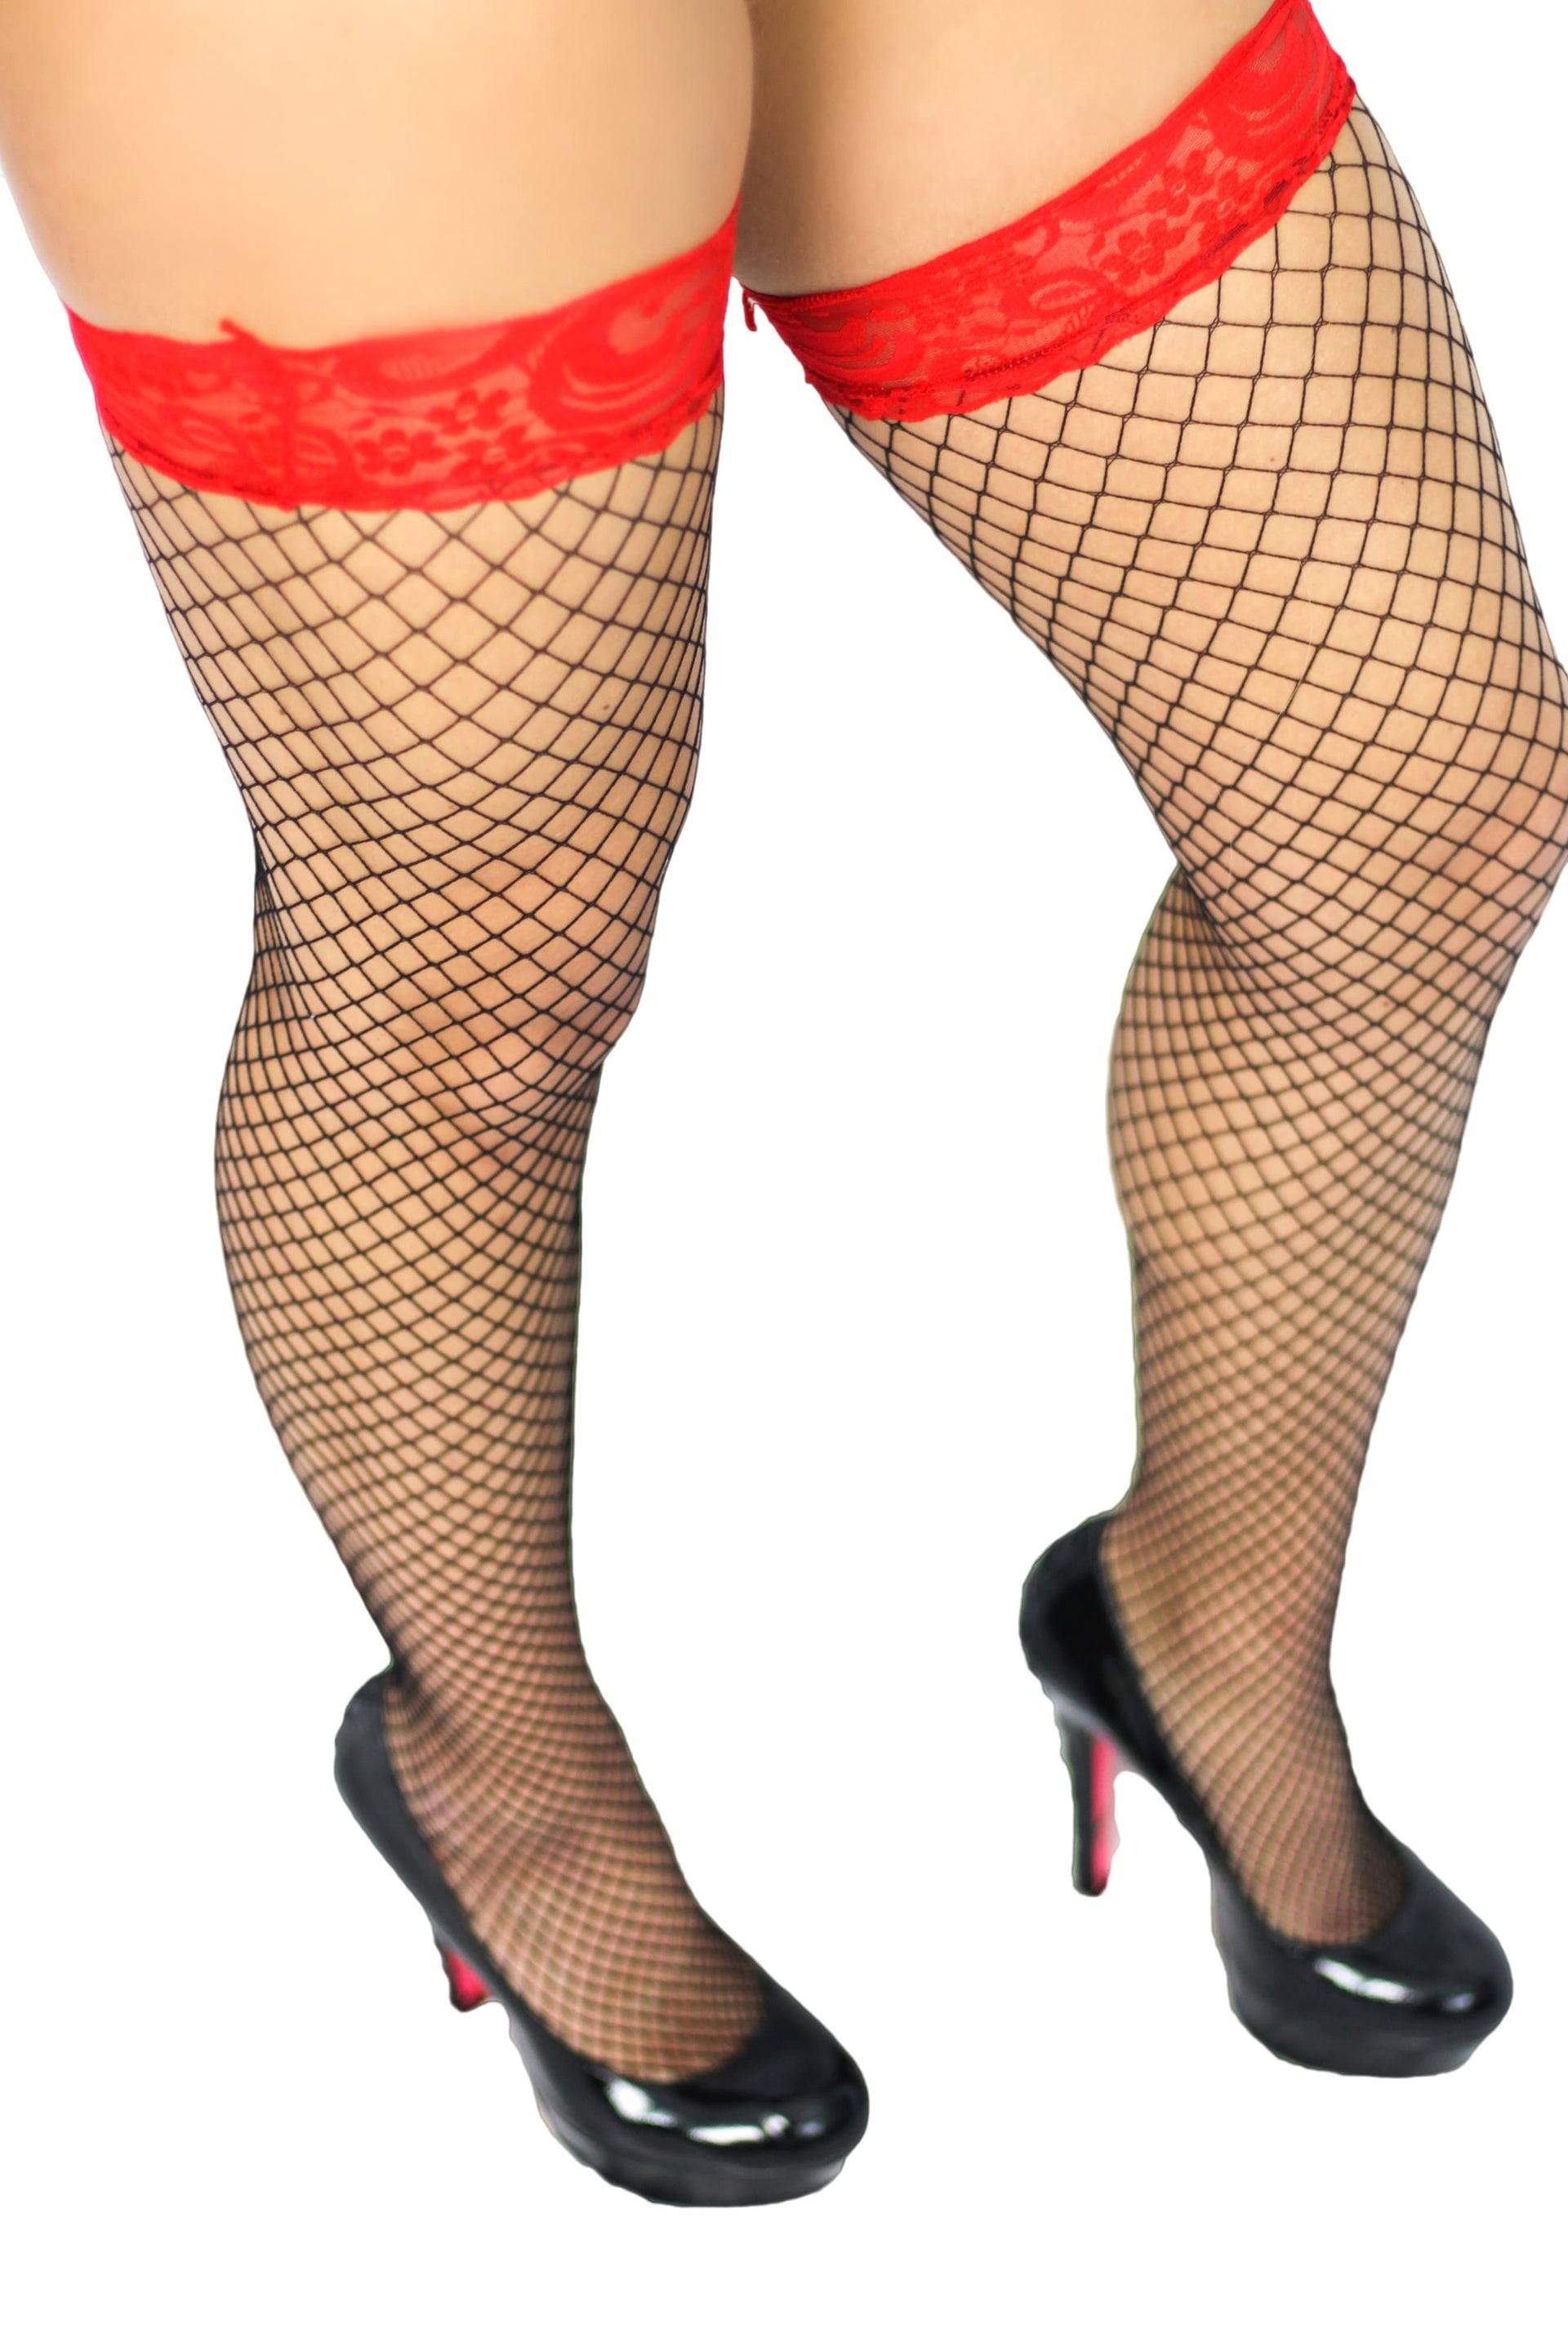 Black fishnet thigh highs sock / stockings with red elastic tops - Cali Diamond